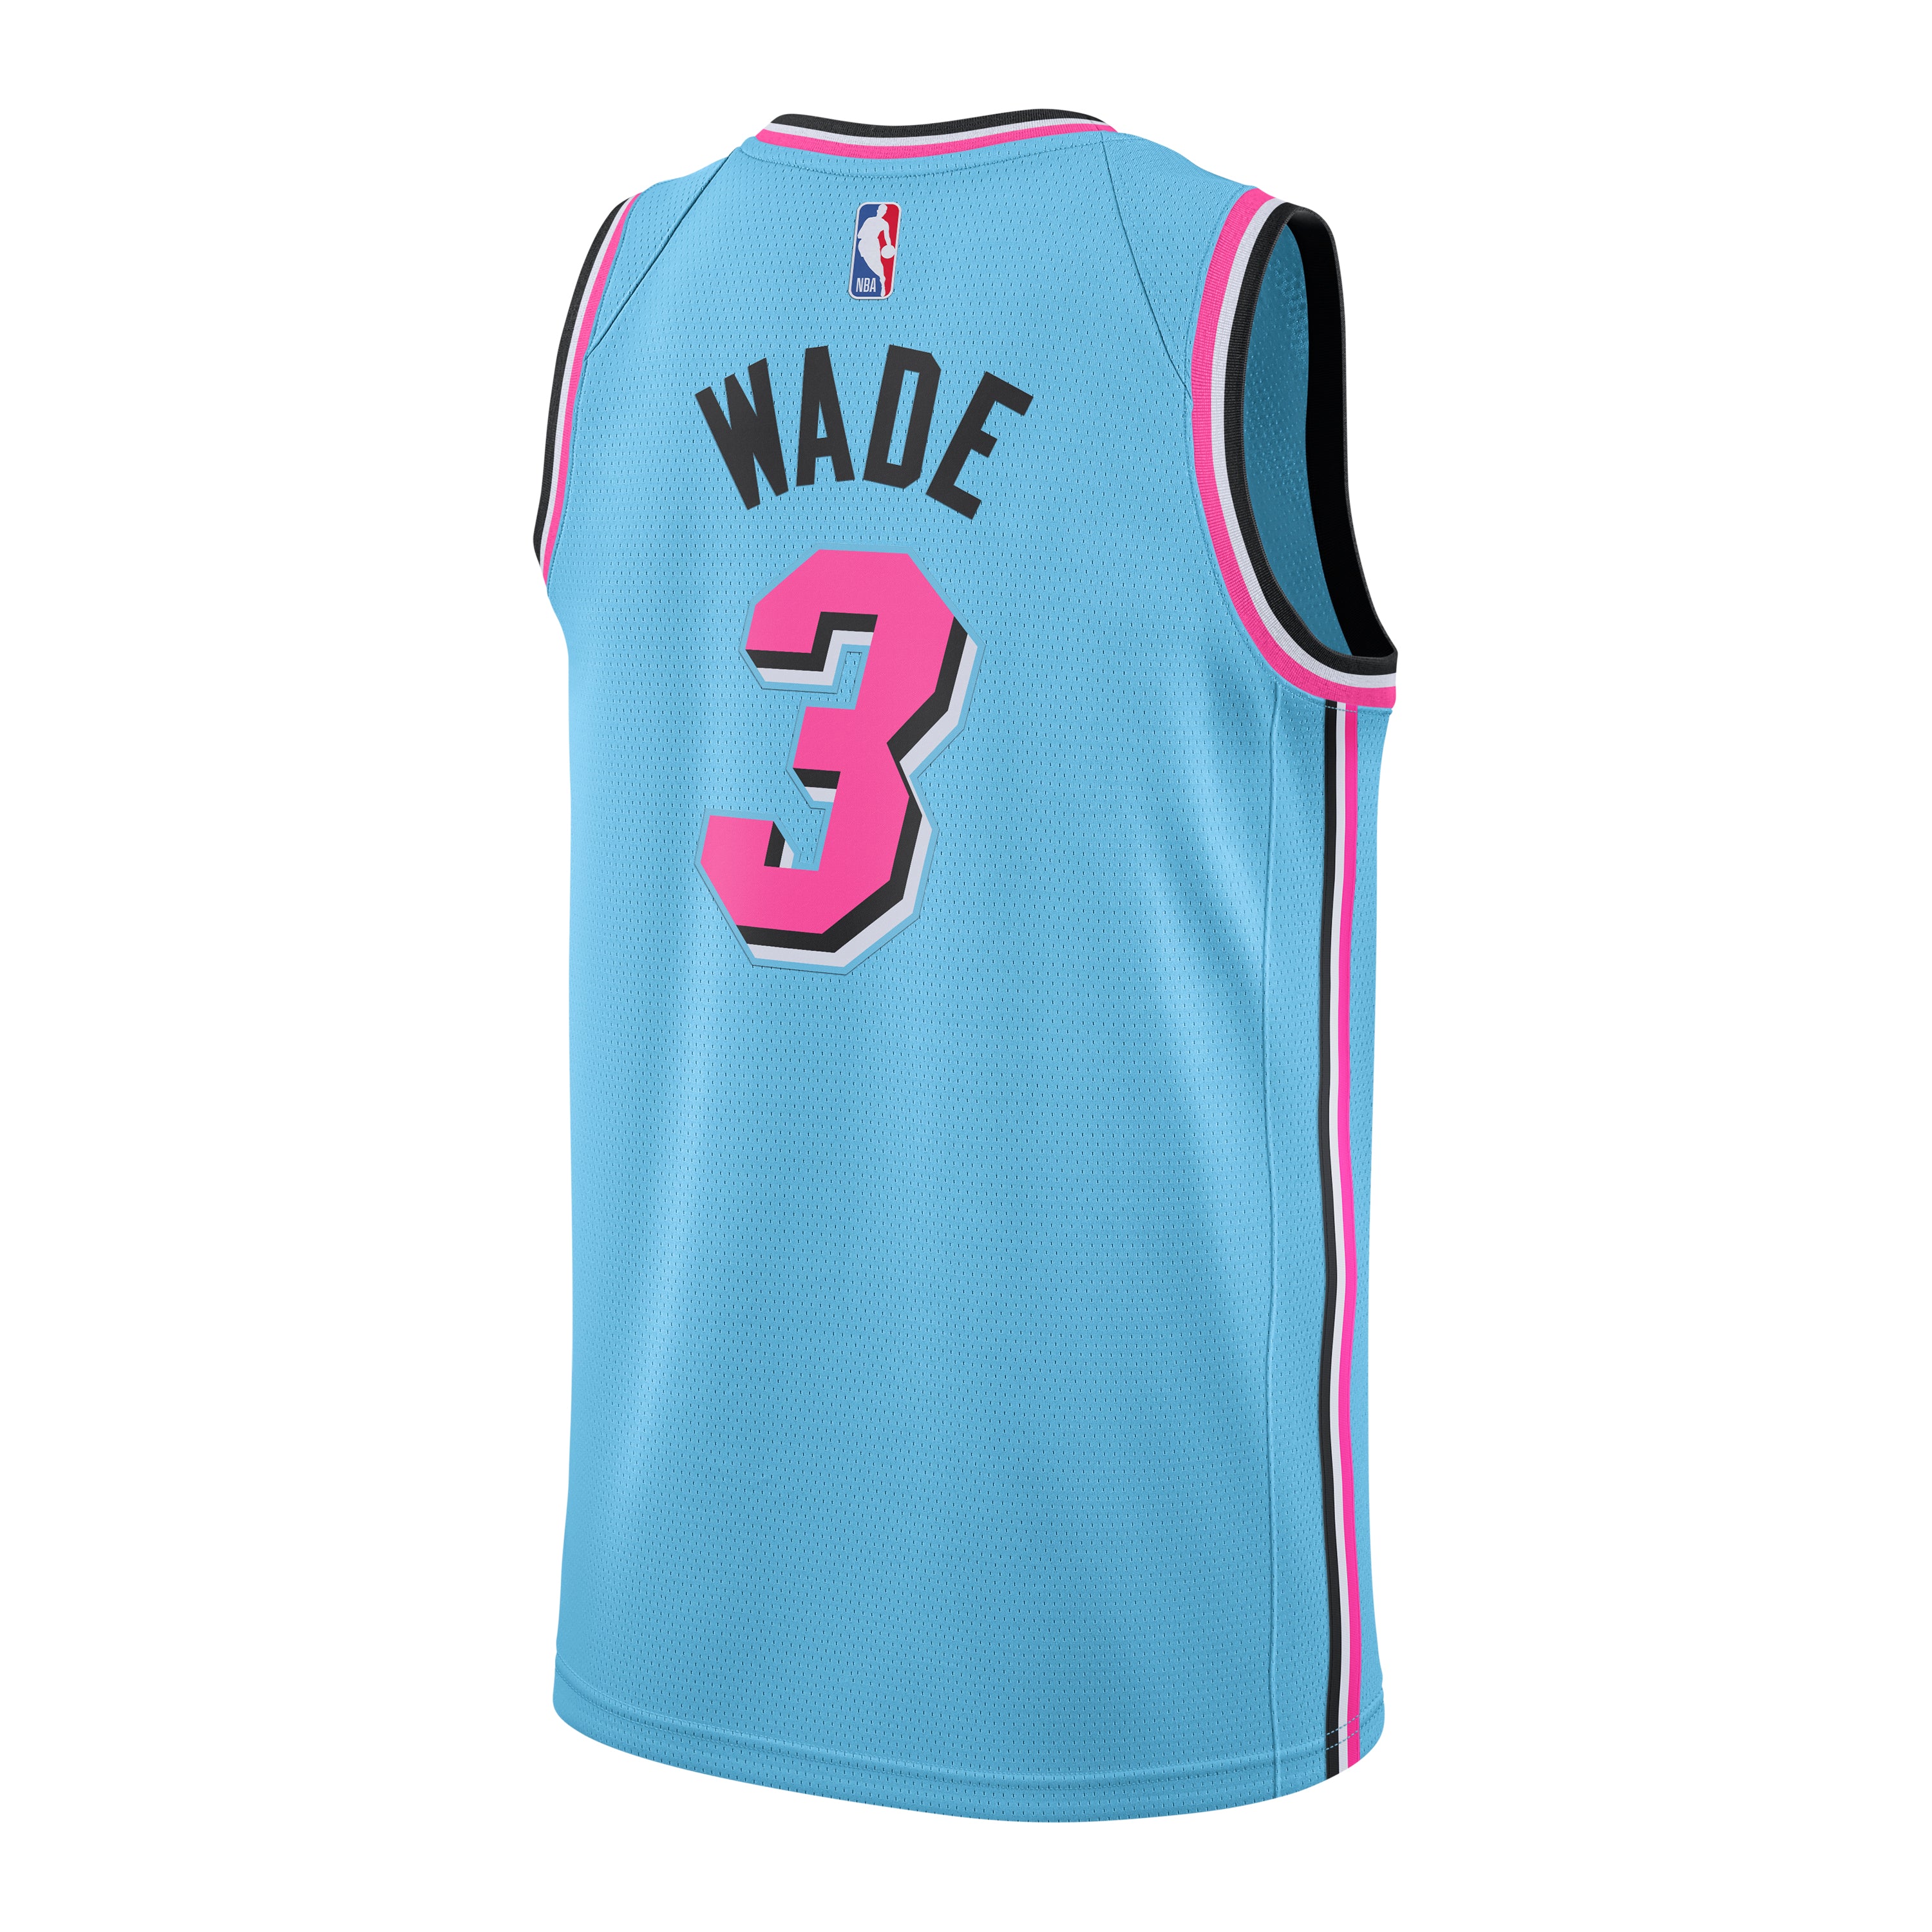 FS D wade Nike Miami heat vicewave jersey size 48 $85 shipped. PayPal f&f  with plenty of vouches. : r/basketballjerseys